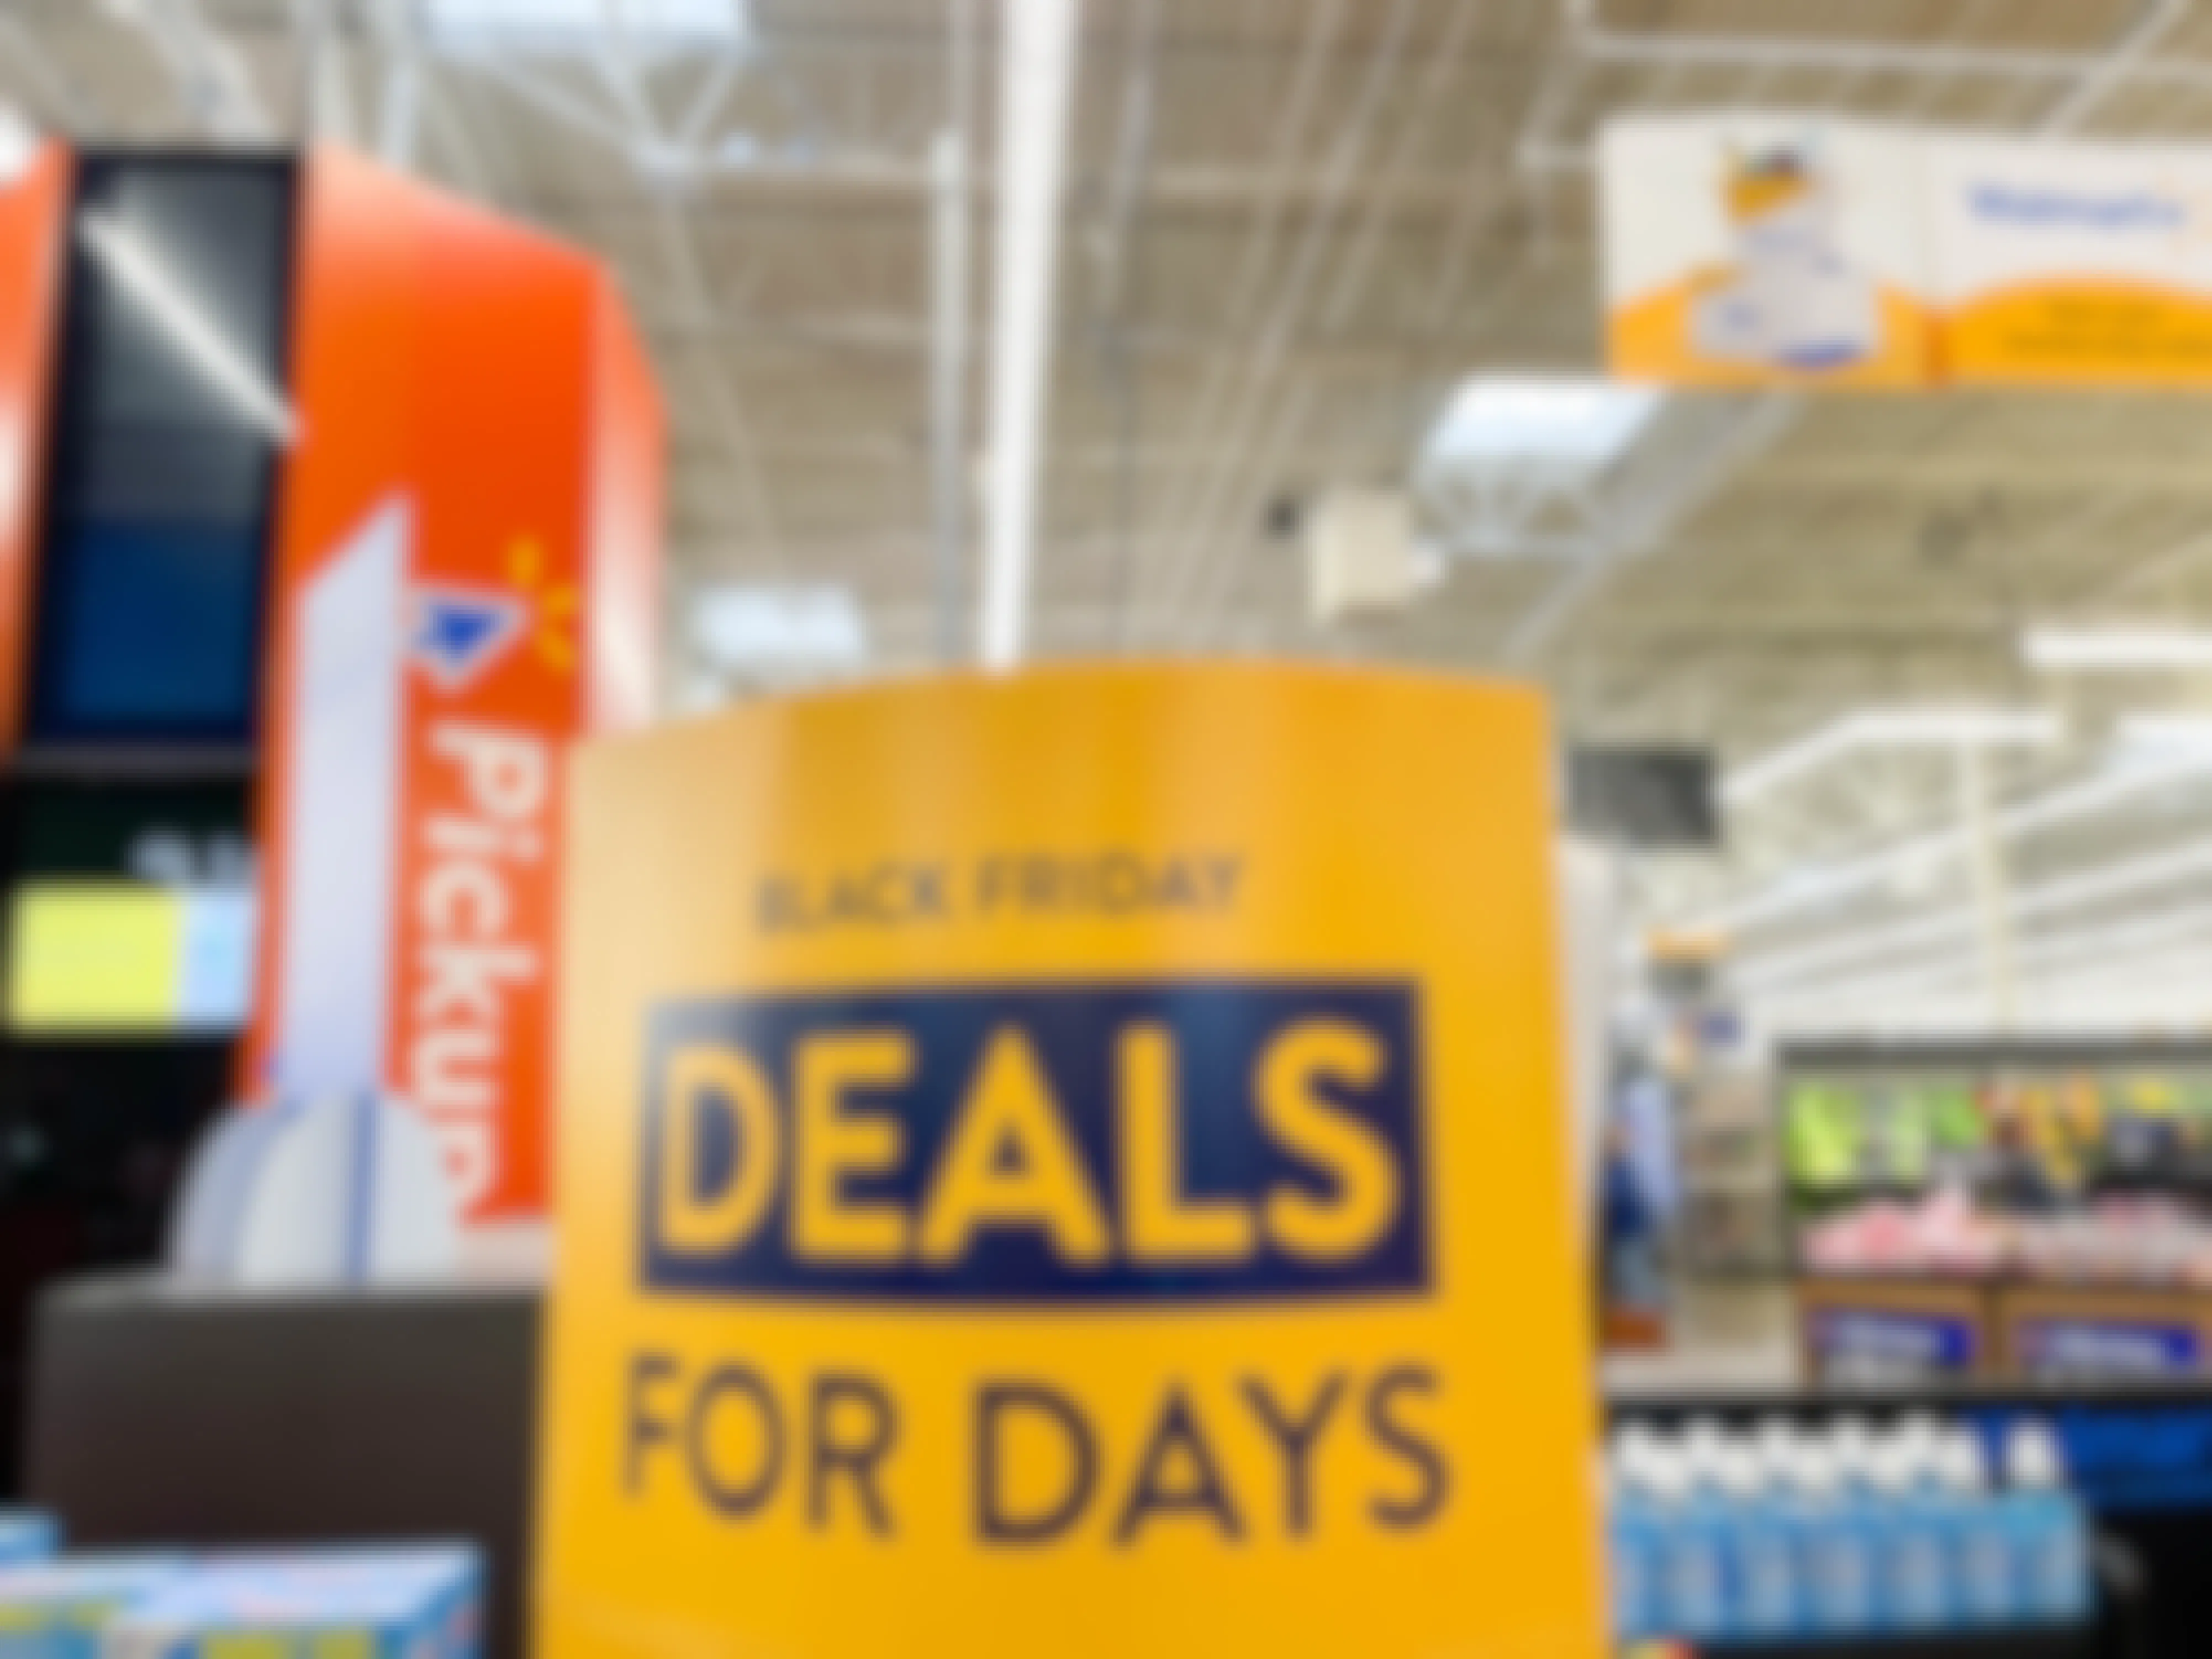 black friday walmart deals for days signs in store